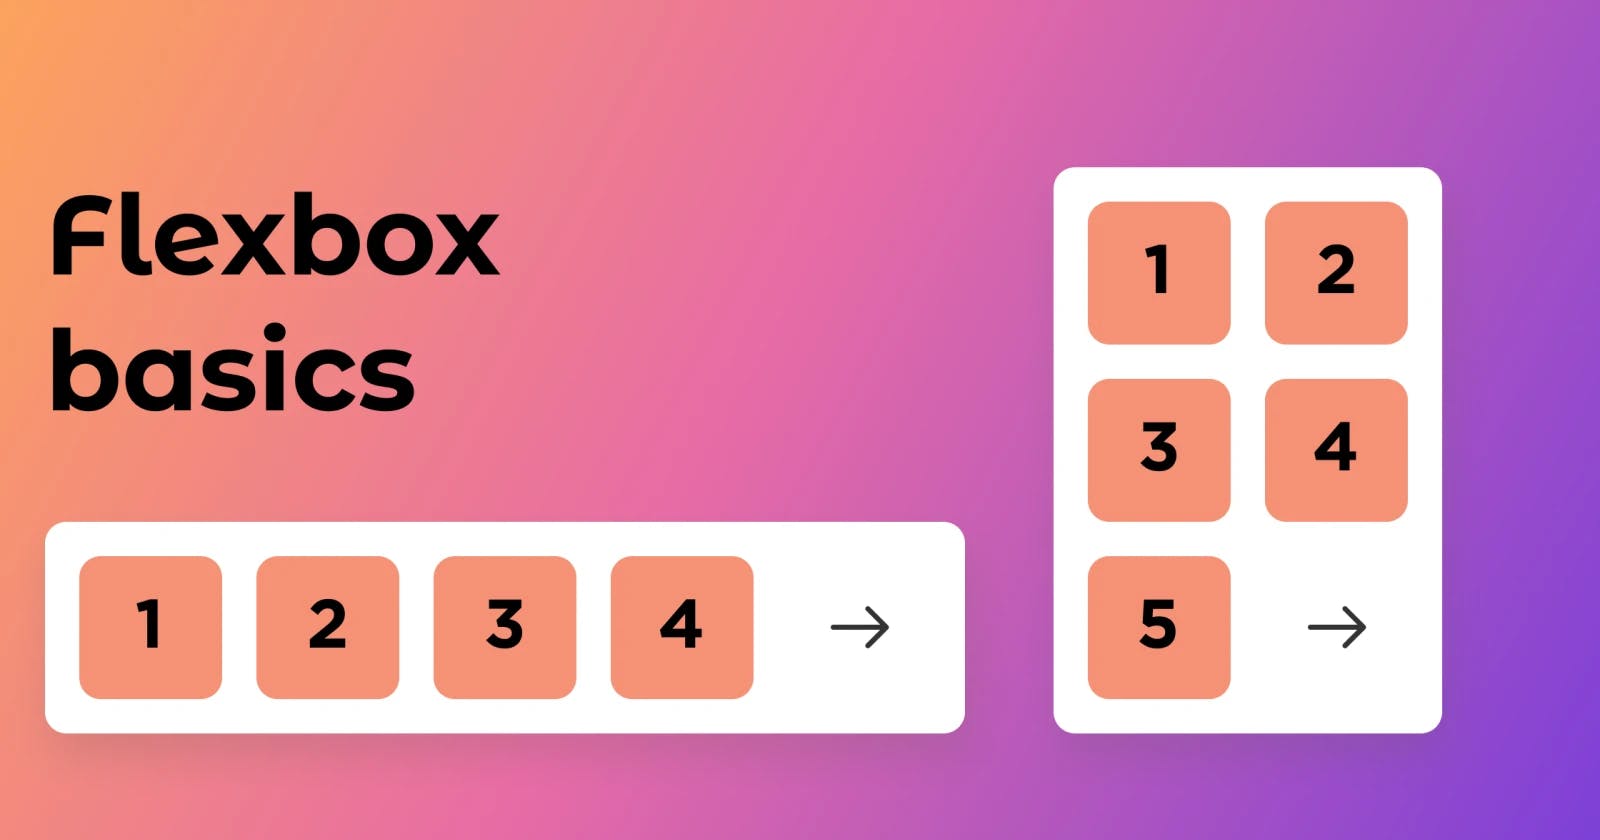 Get Started With Flexbox